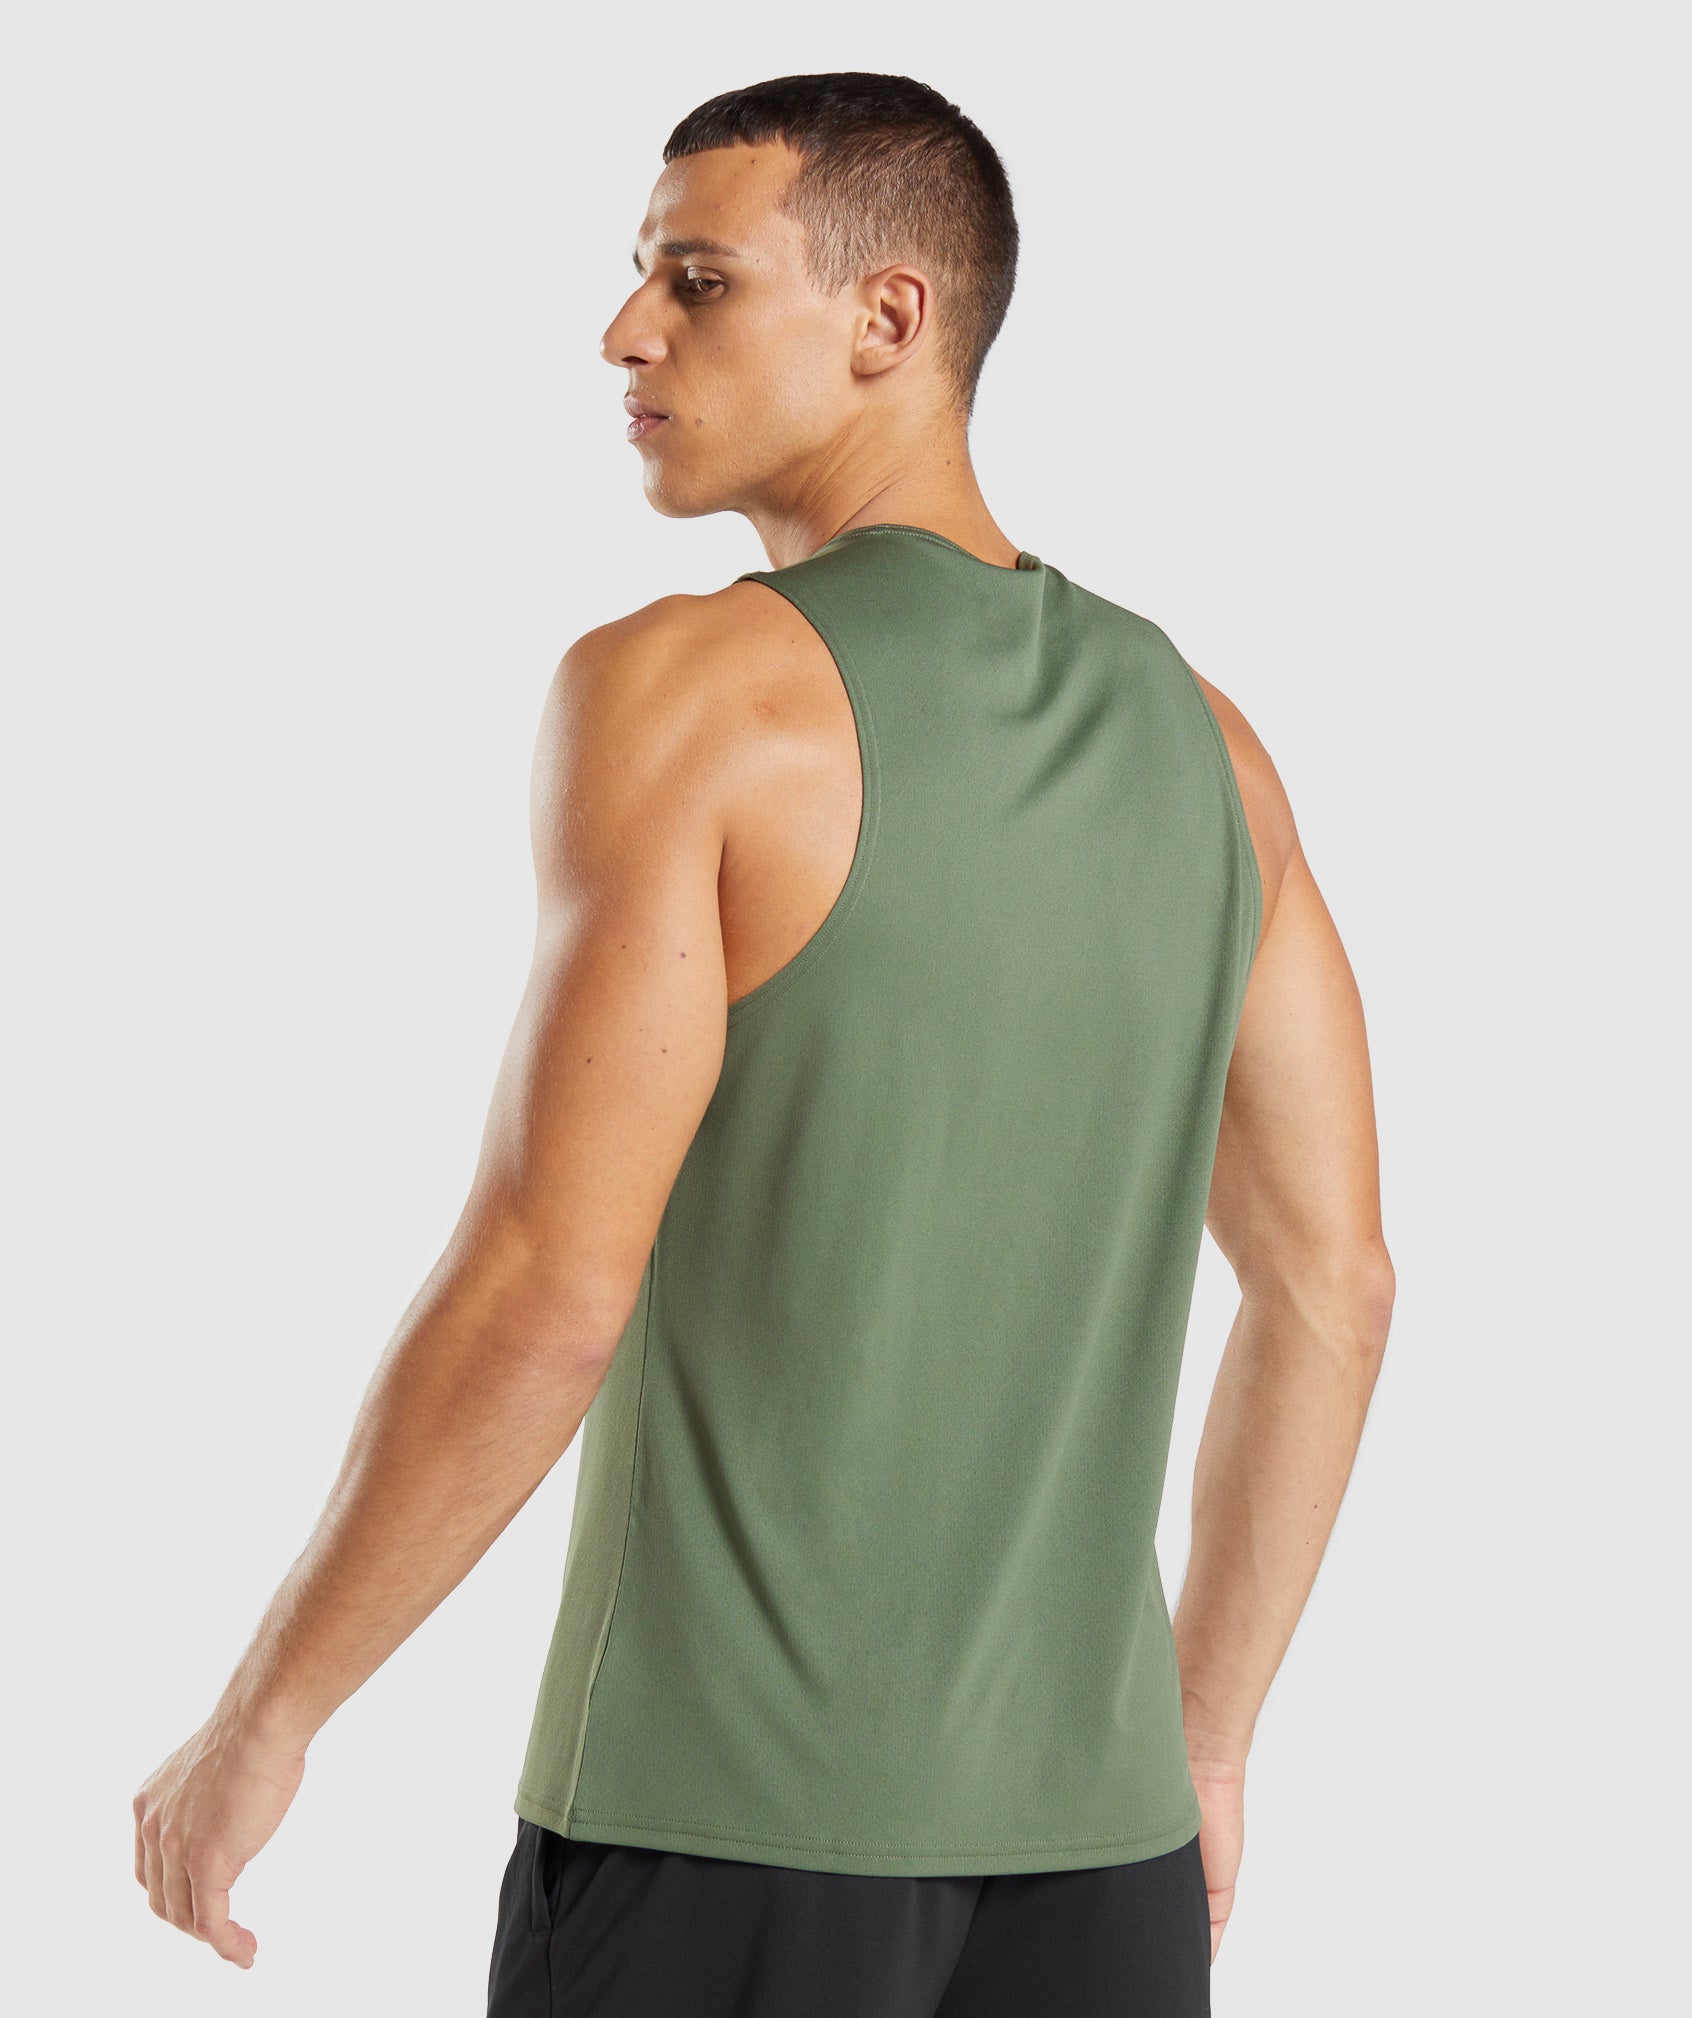 Arrival Tank in Core Olive - view 2